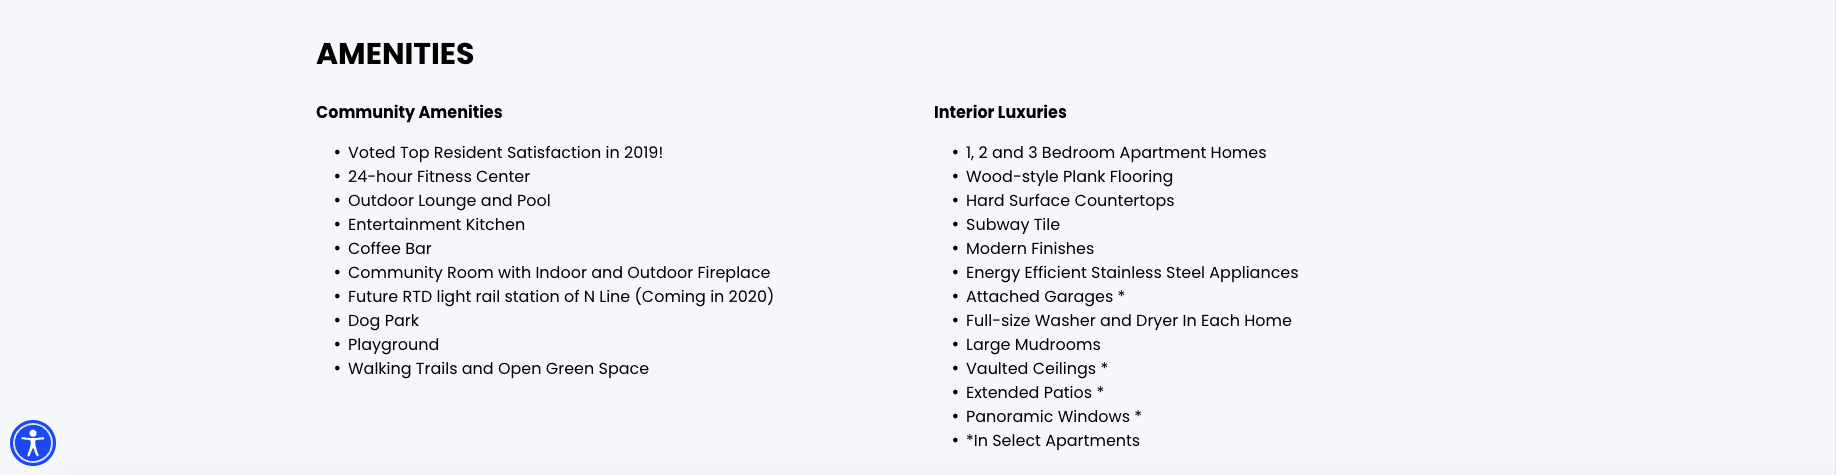 apartment landing page amenities & features